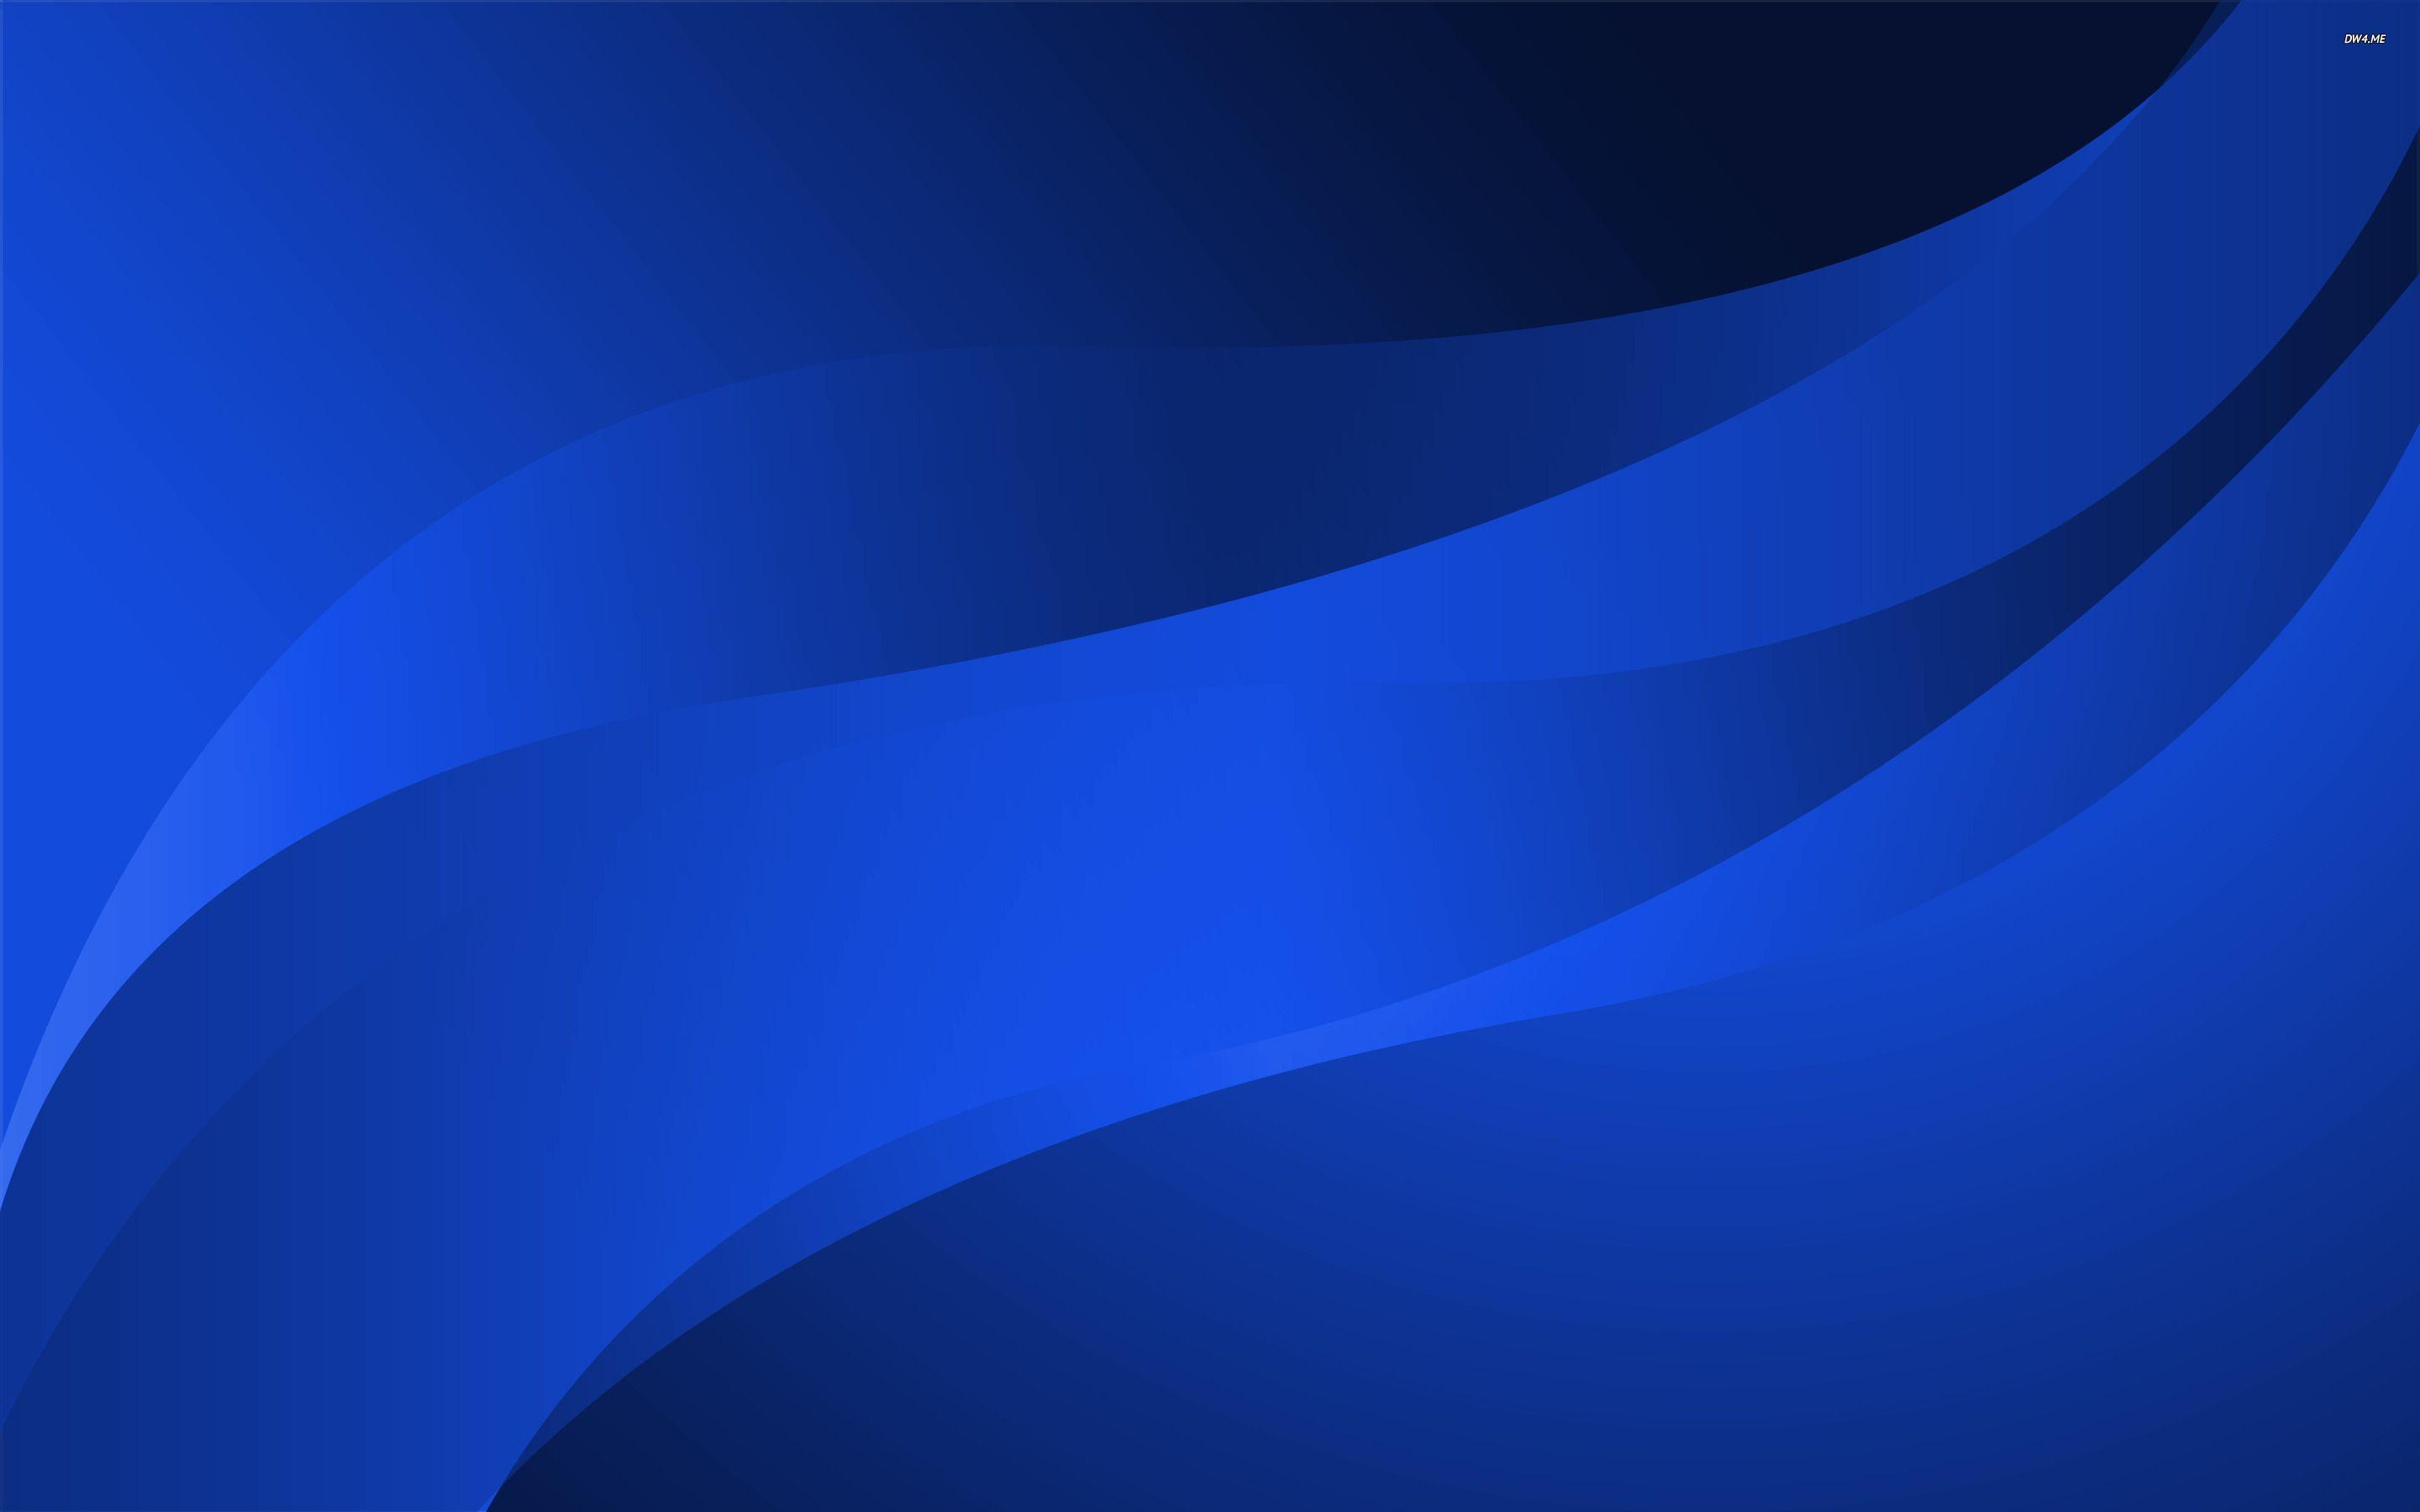 Blue Abstract 1080p Wallpaper Background Full HD Pics For Desktop